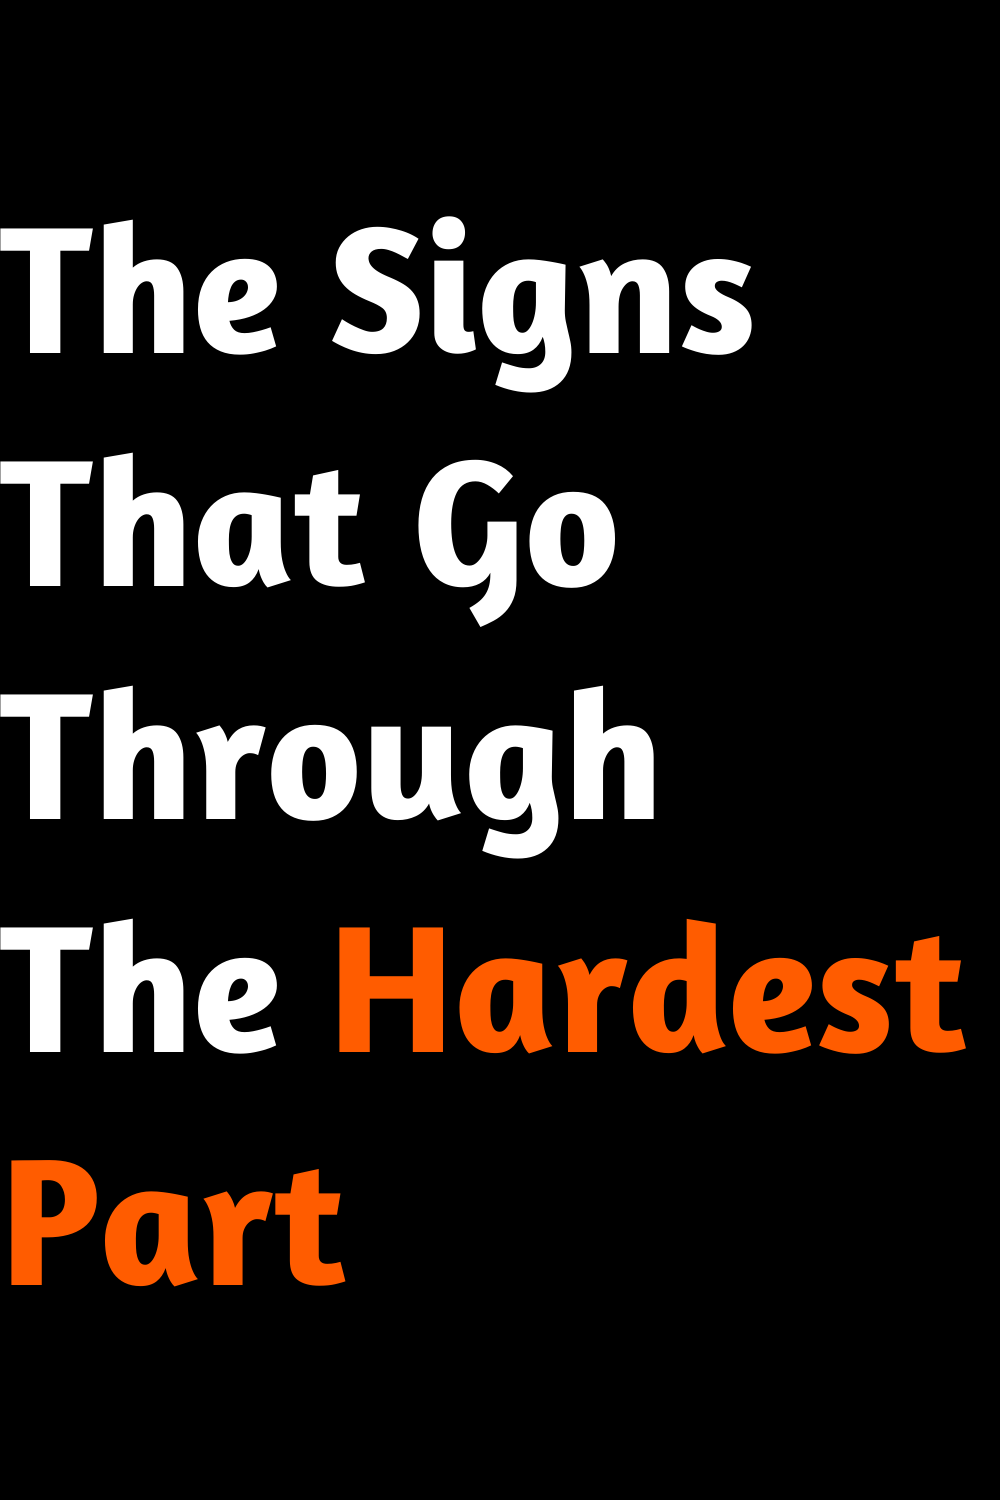 The Signs That Go Through The Hardest Part